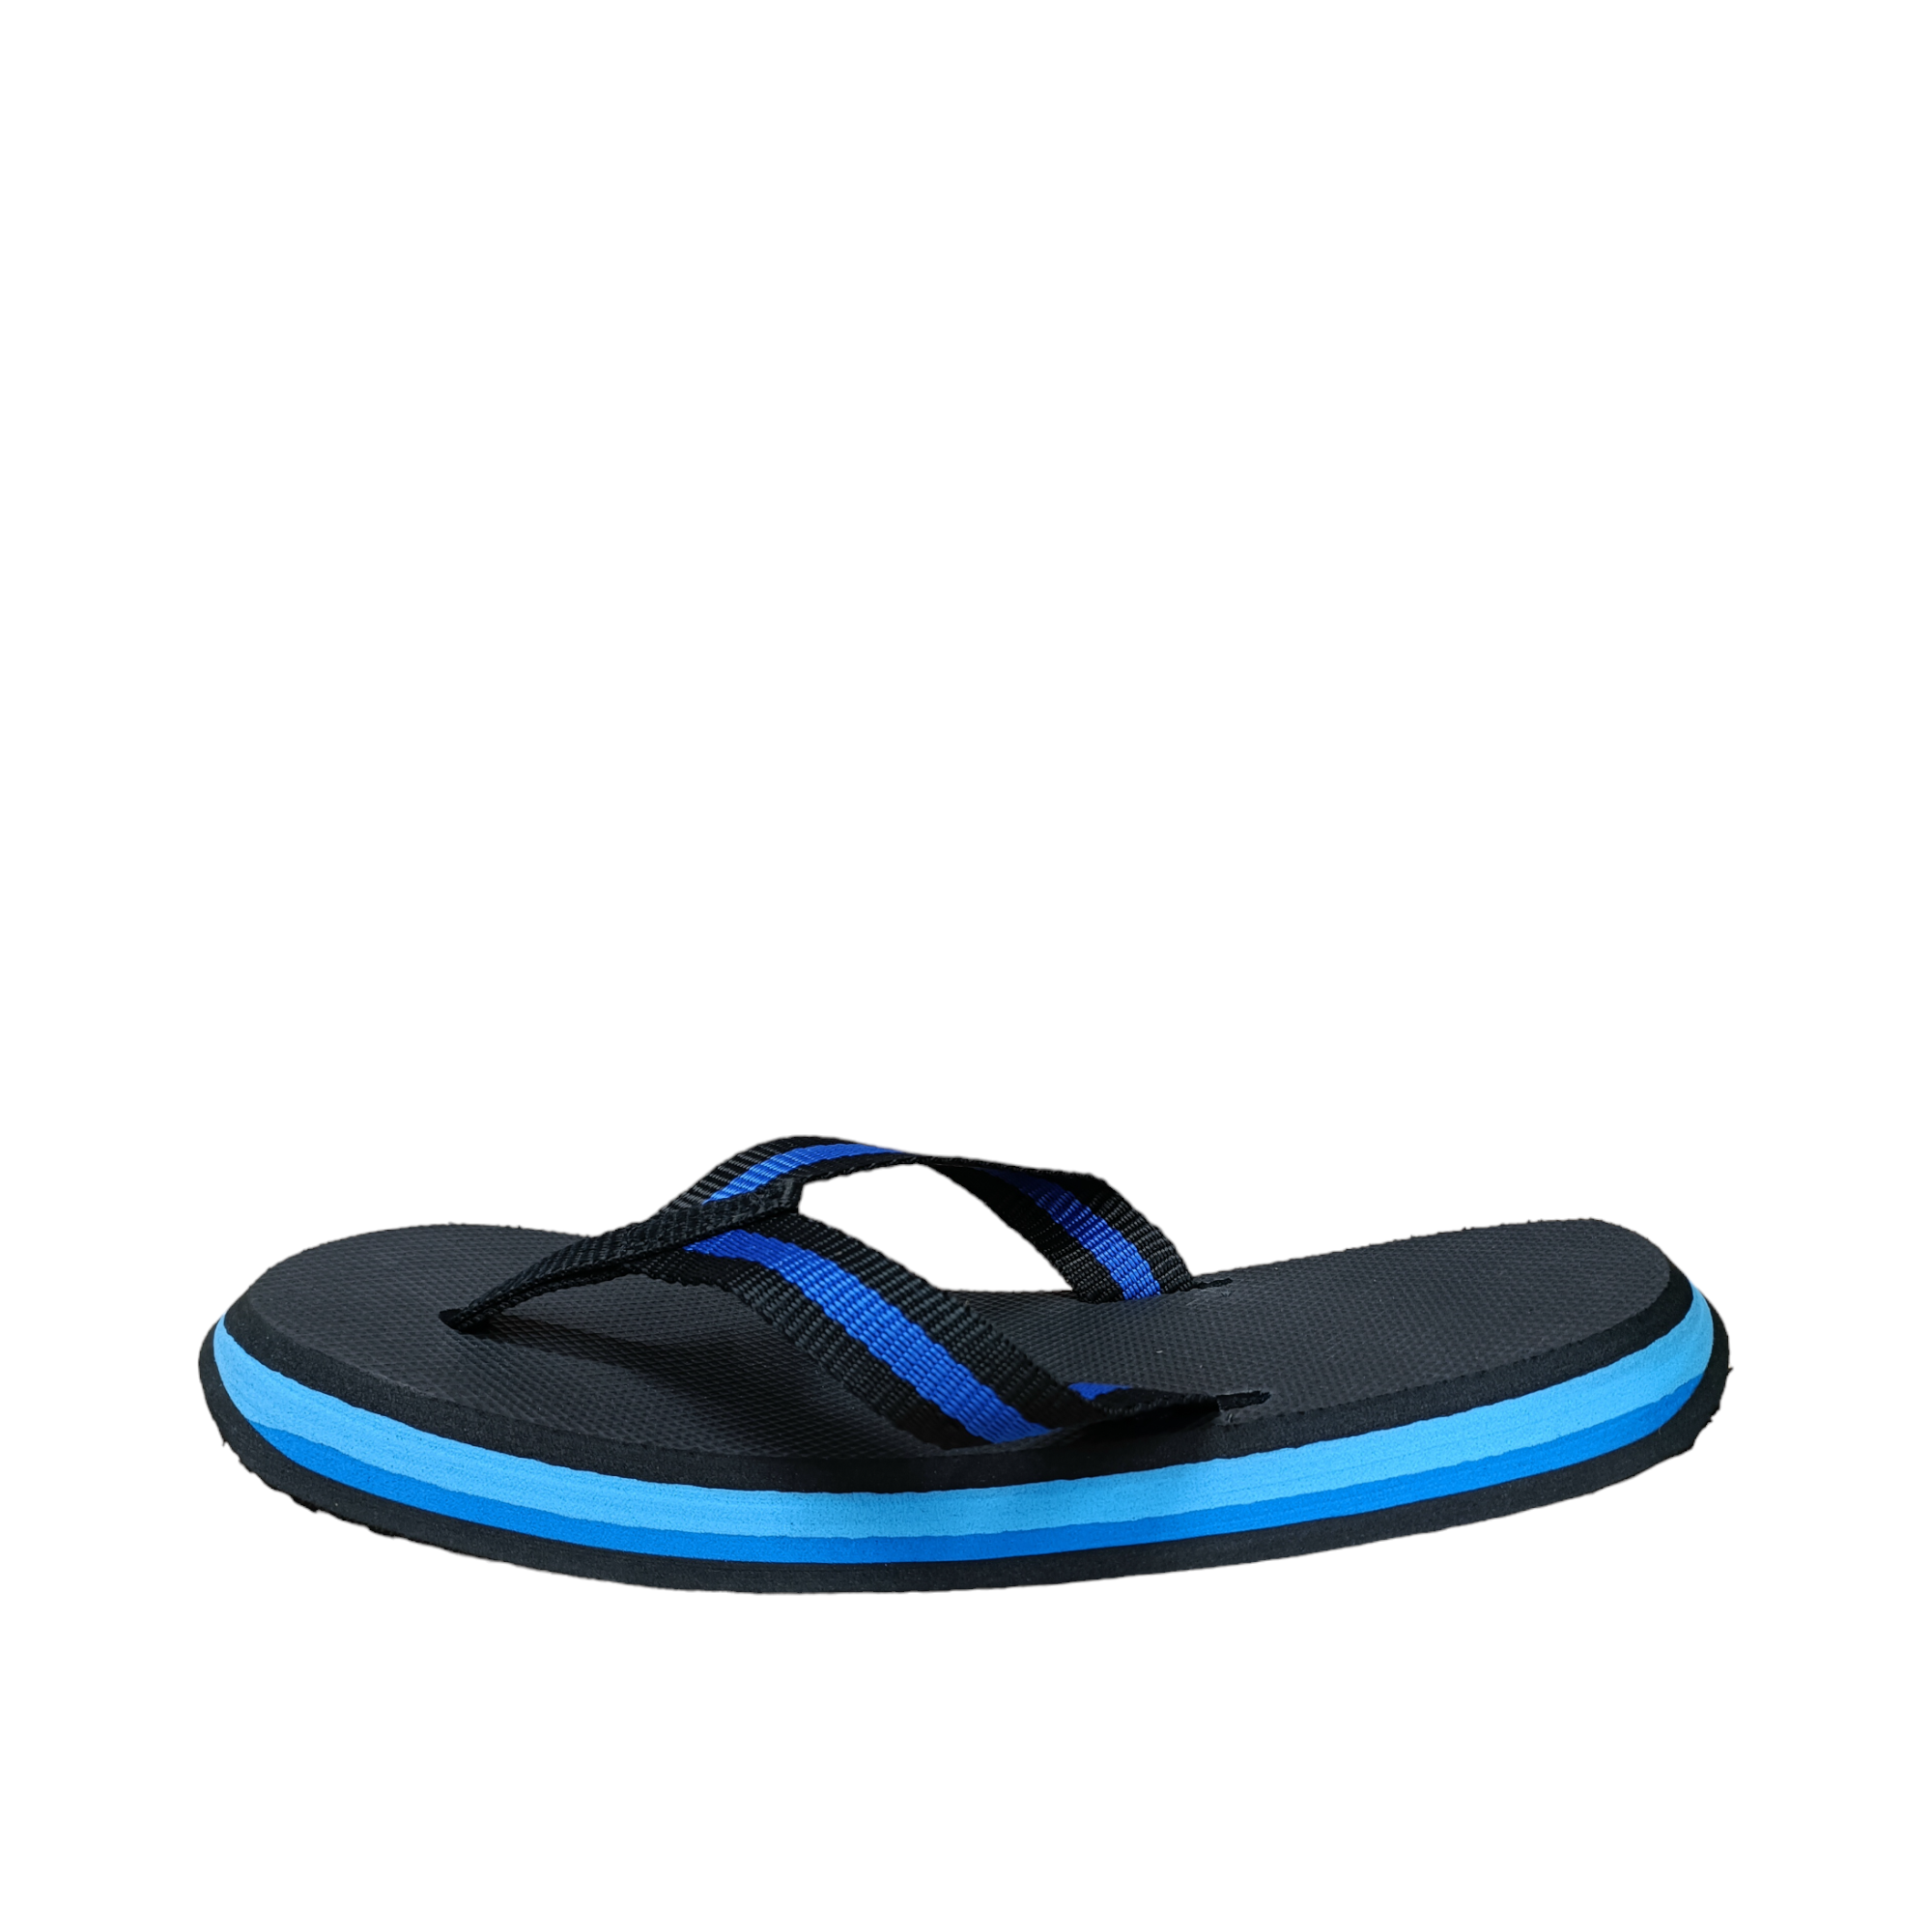 Stompers - shoe&me - Stompers - Jandal - Jandals, Mens, Summer, Unisex, Womens